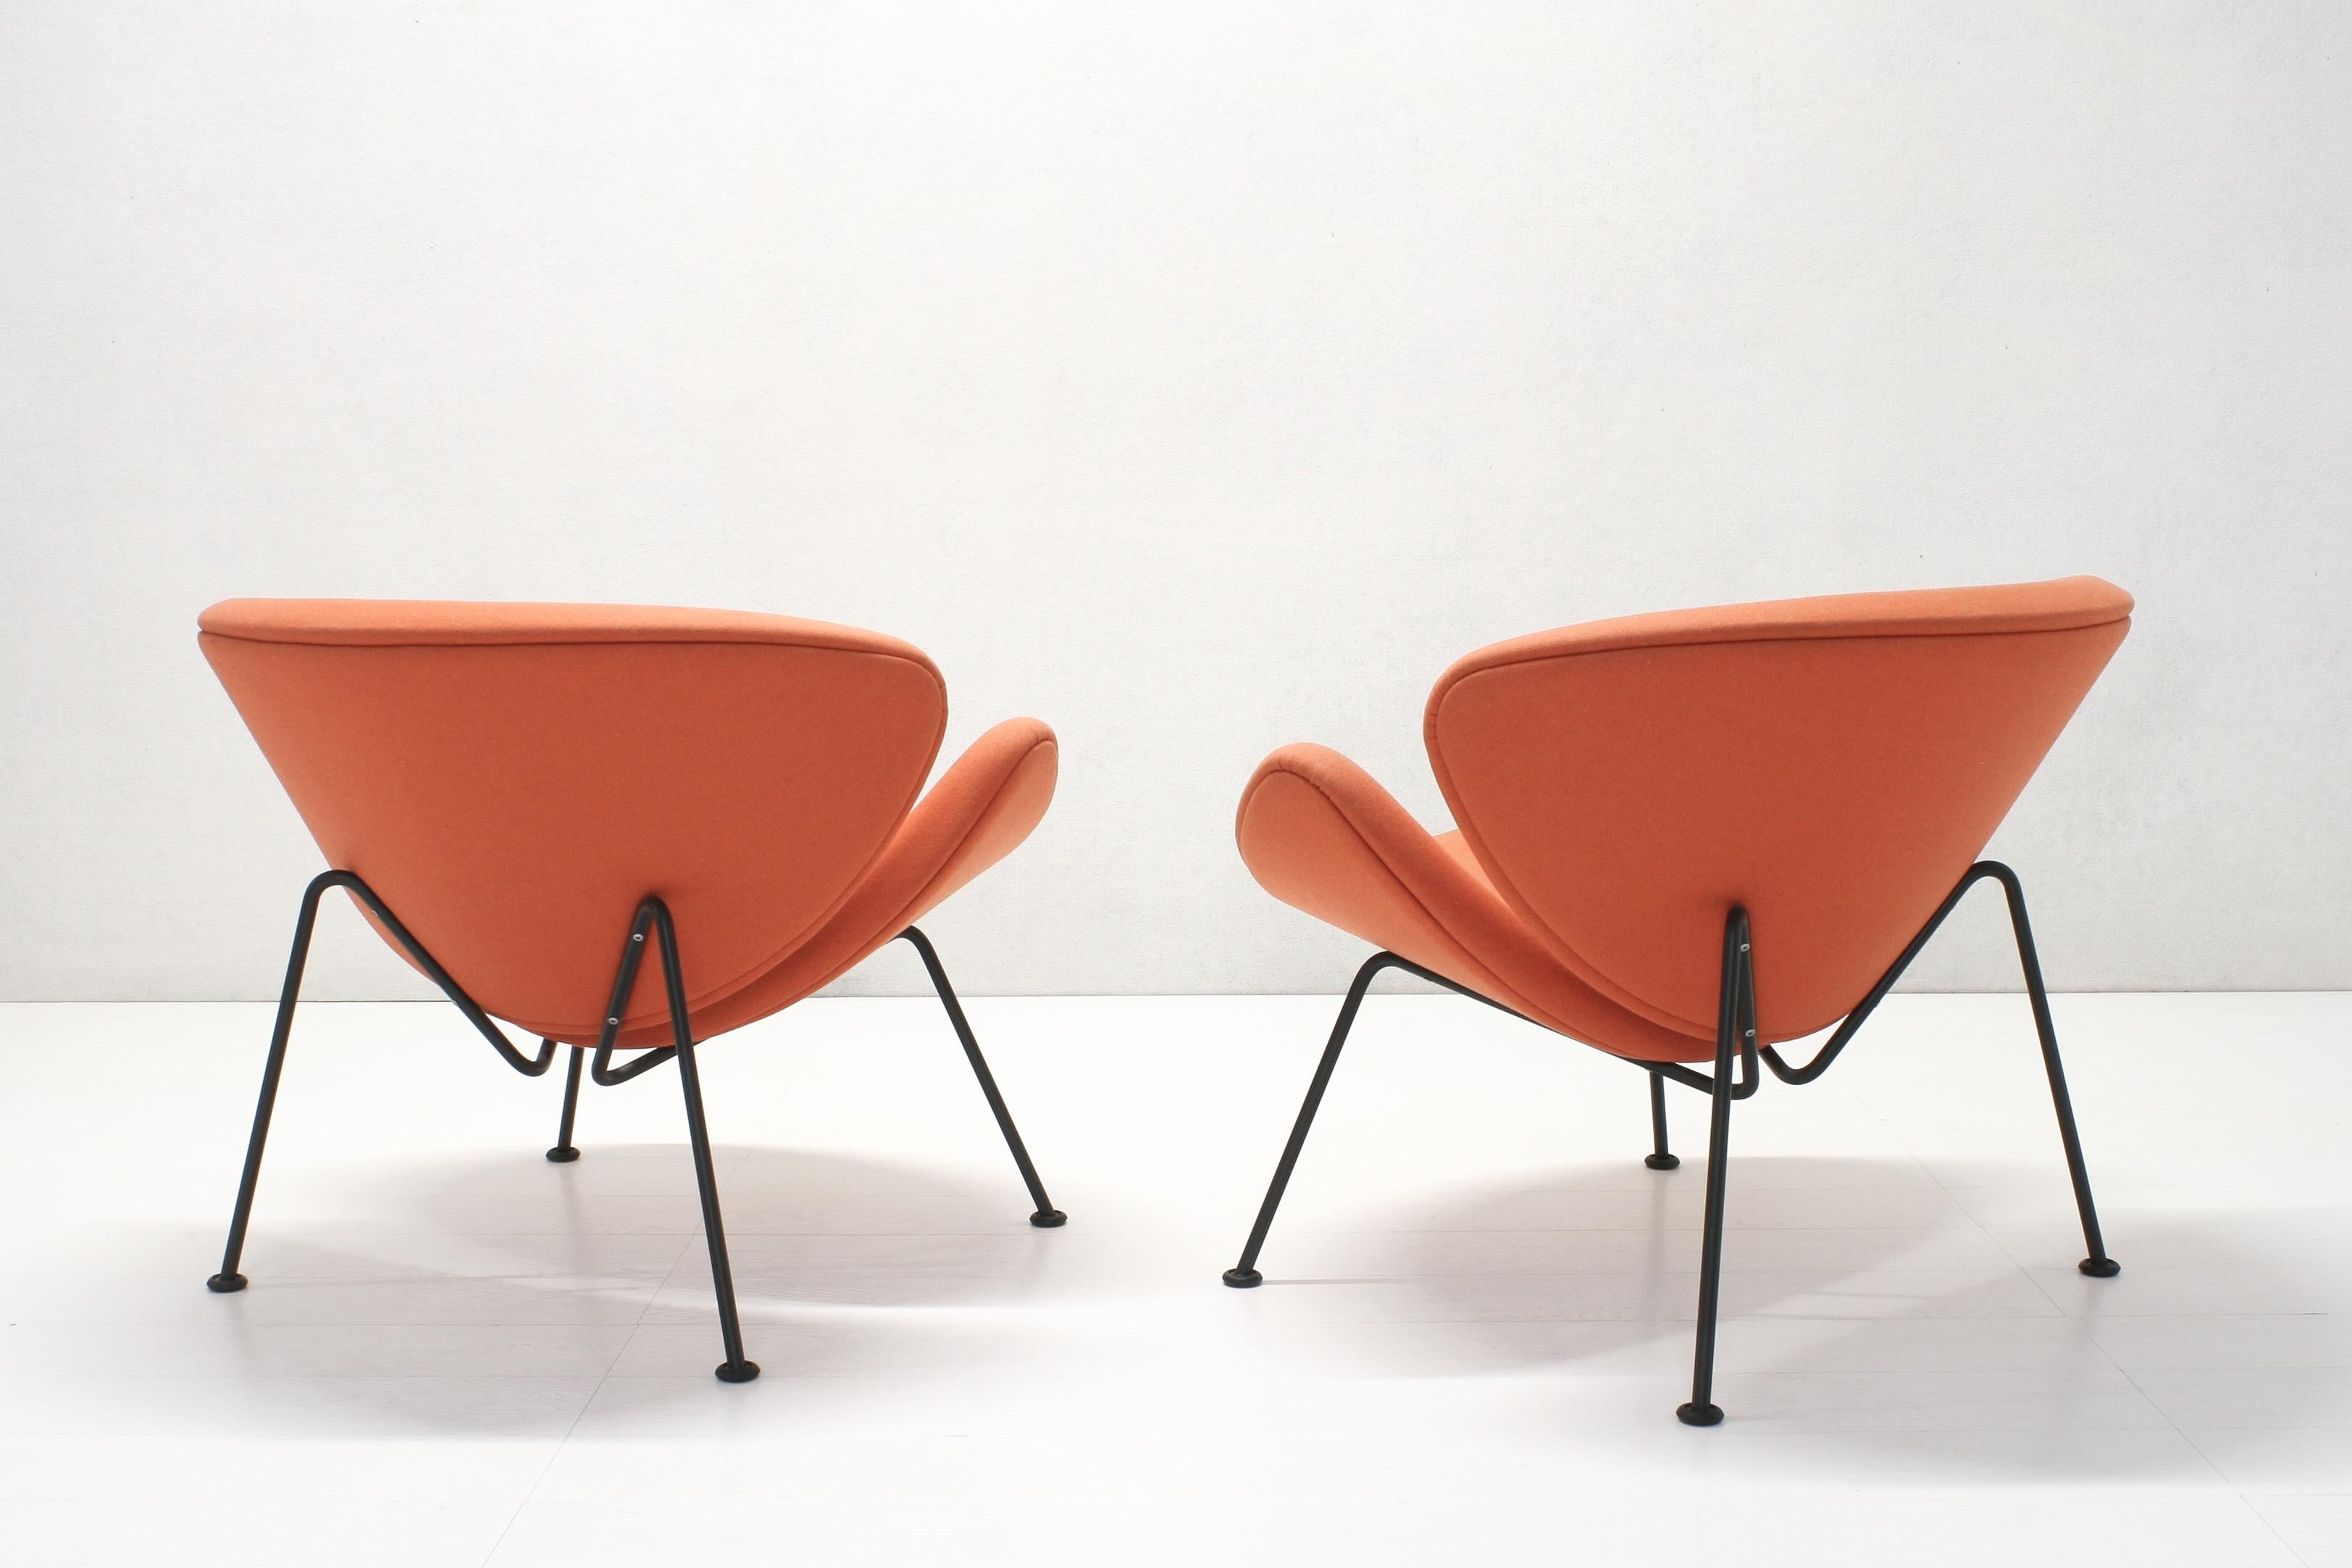 The F437 lounge chair, commonly known as the Orange Slice chair was created by French designer Pierre Paulin in 1960 and is one of the most popular design armchairs in the world. The iconic armchair makes every room more open, spacious and cheerful.